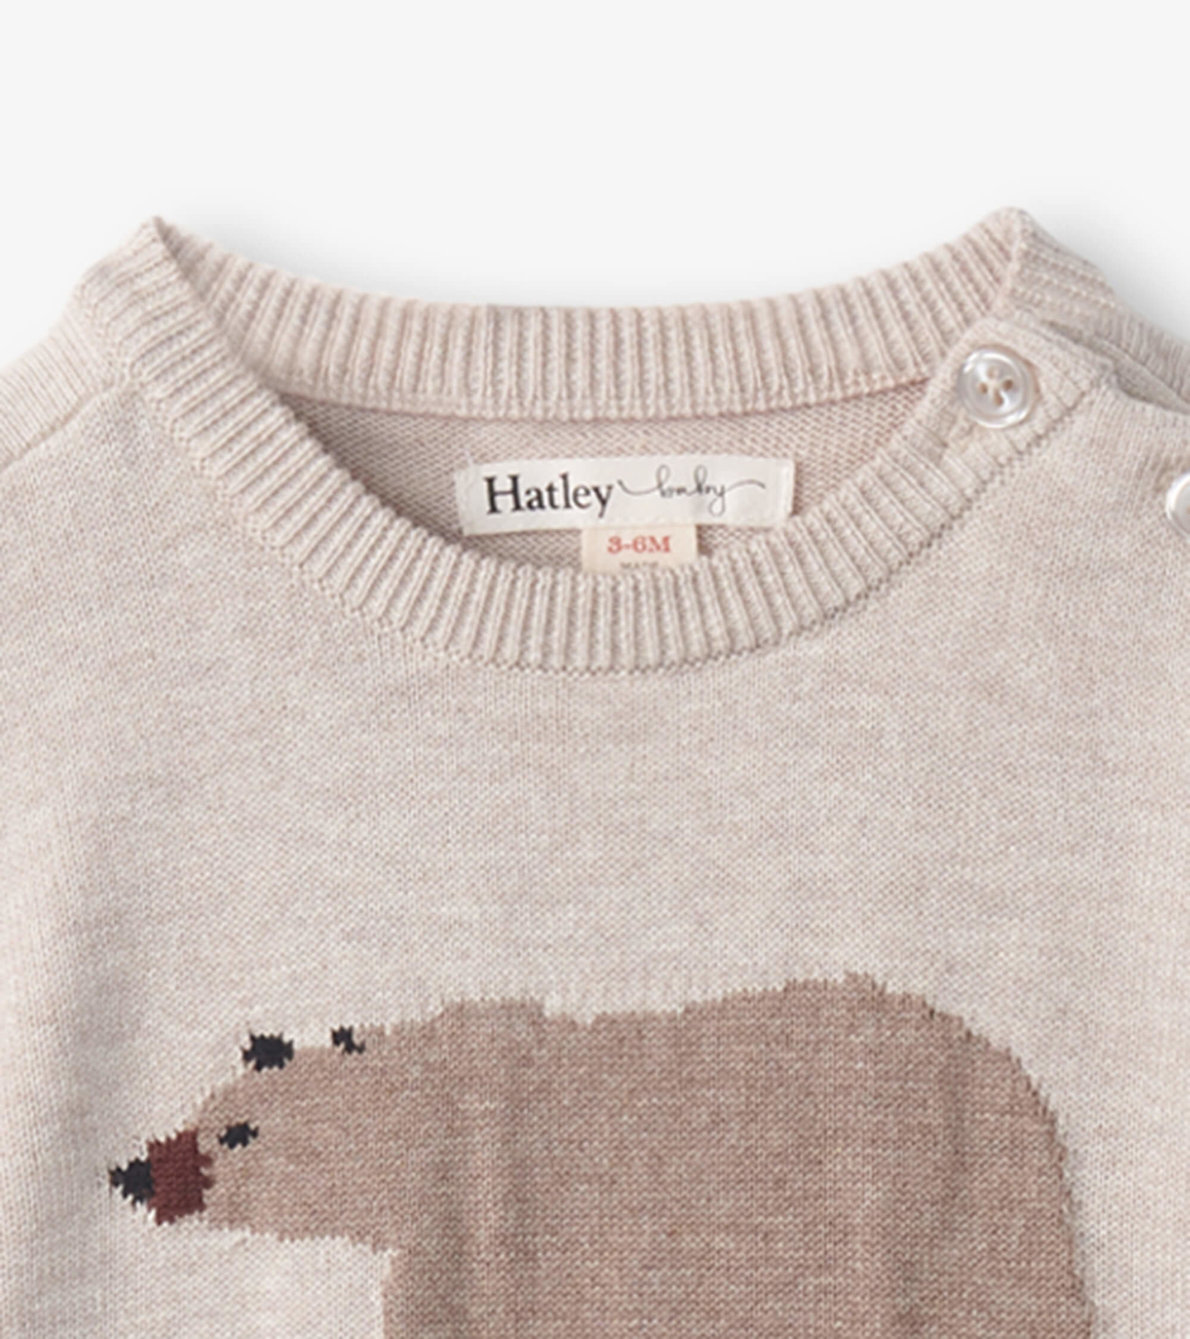 View larger image of Baby Bear Cub Sweater Onesie